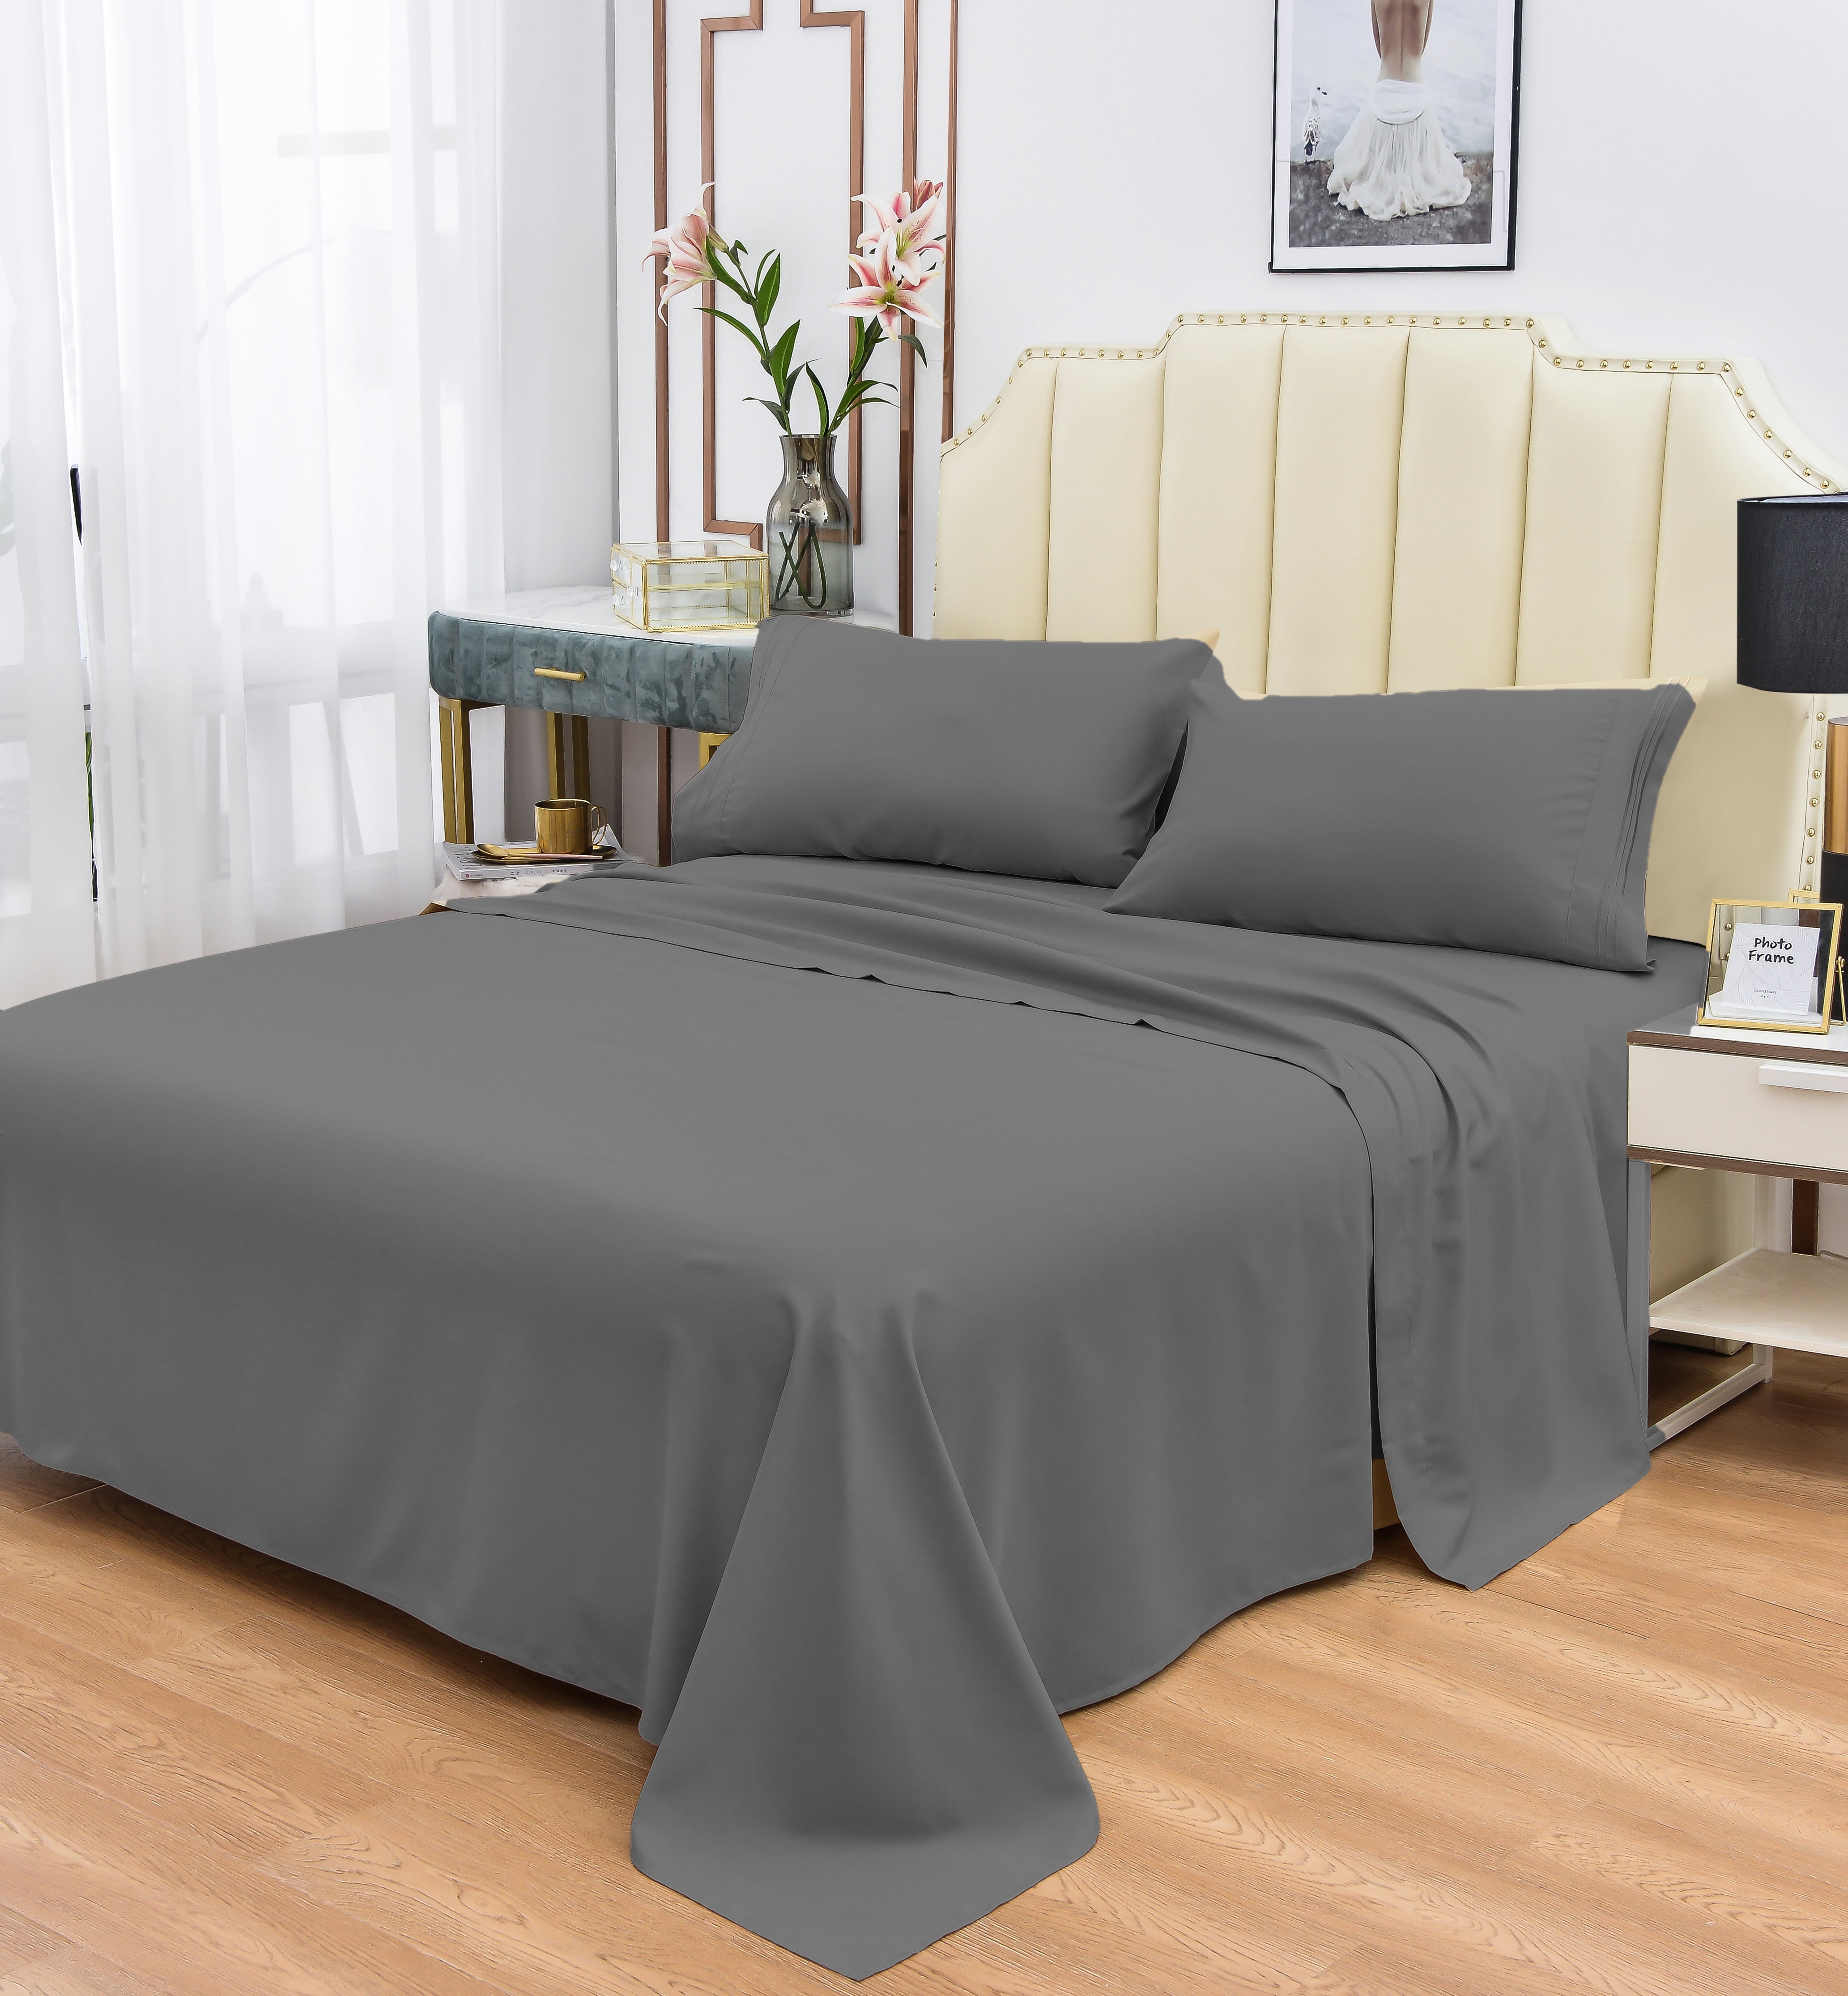 Okao Wholesale Rayon Made from Bamboo Sheet Set - Wrinkle Free -Softer than Cotton- Deep Pockets - 4 Piece - 1 Fitted Sheet, 1 Flat, 2 Pillowcases Full, Gray picture picture